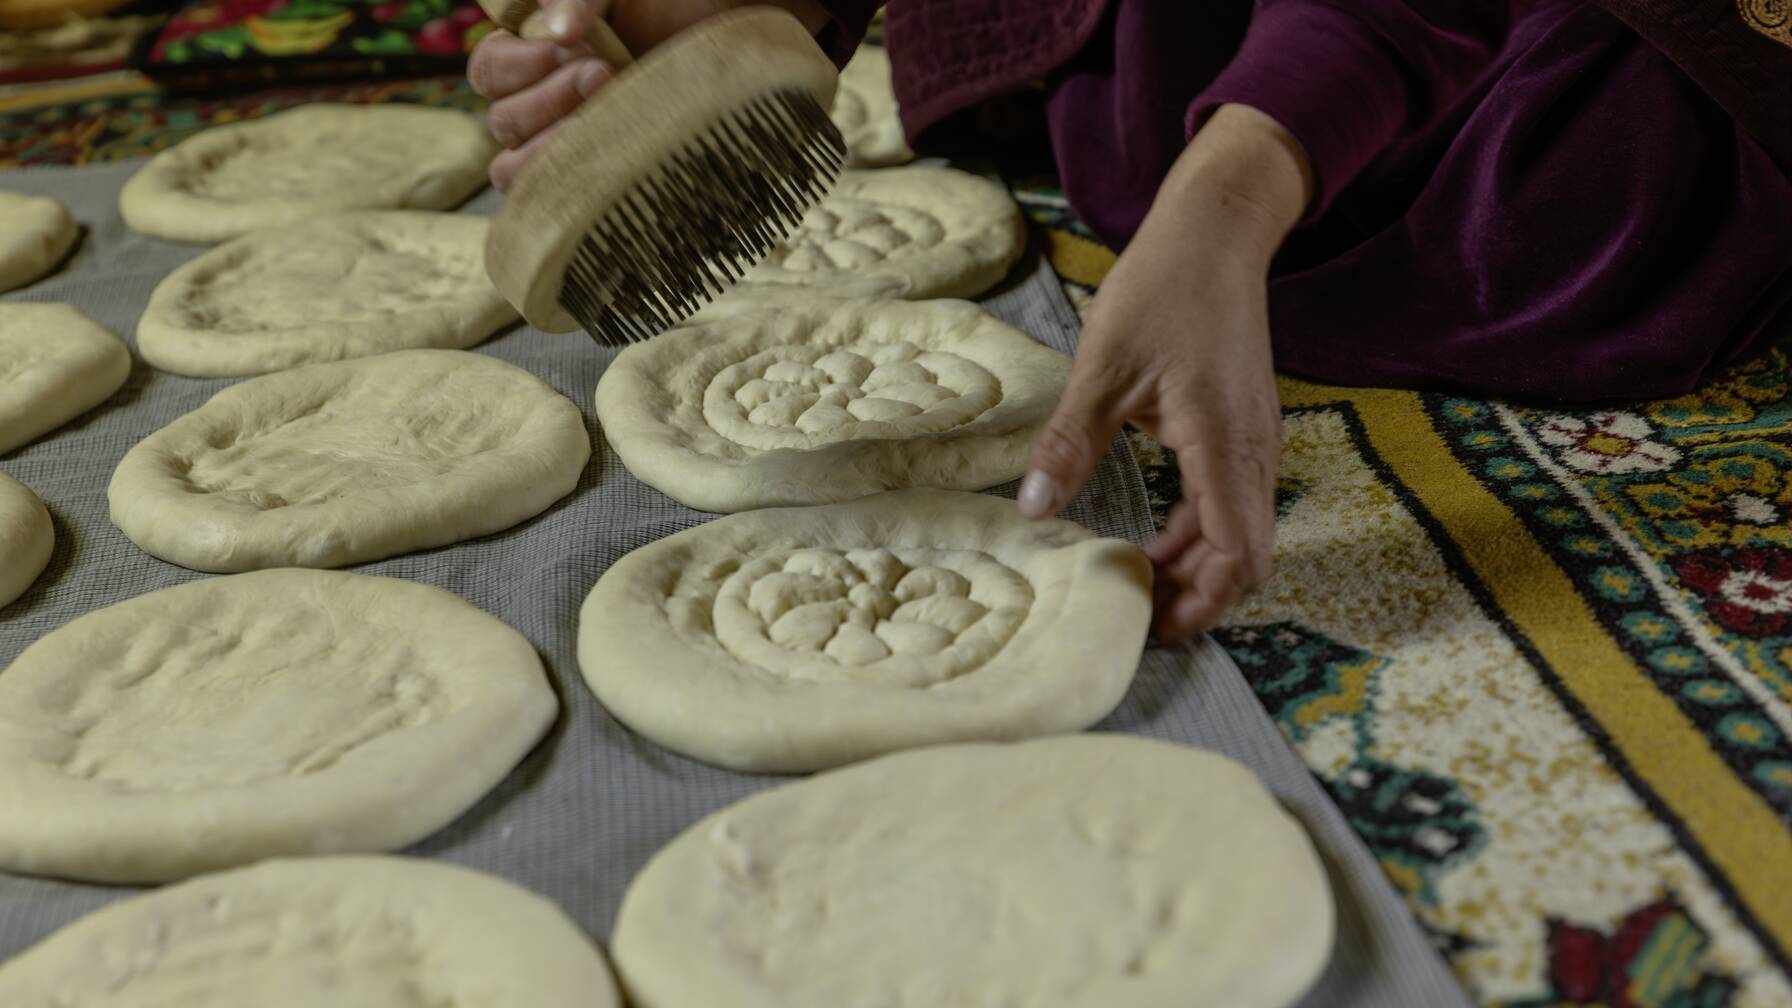 Along with potatoes, bread is one of the most important foods of the rural population in Tajikistan. Shokirjon's daughter-in-law bakes fresh bread twice a week.